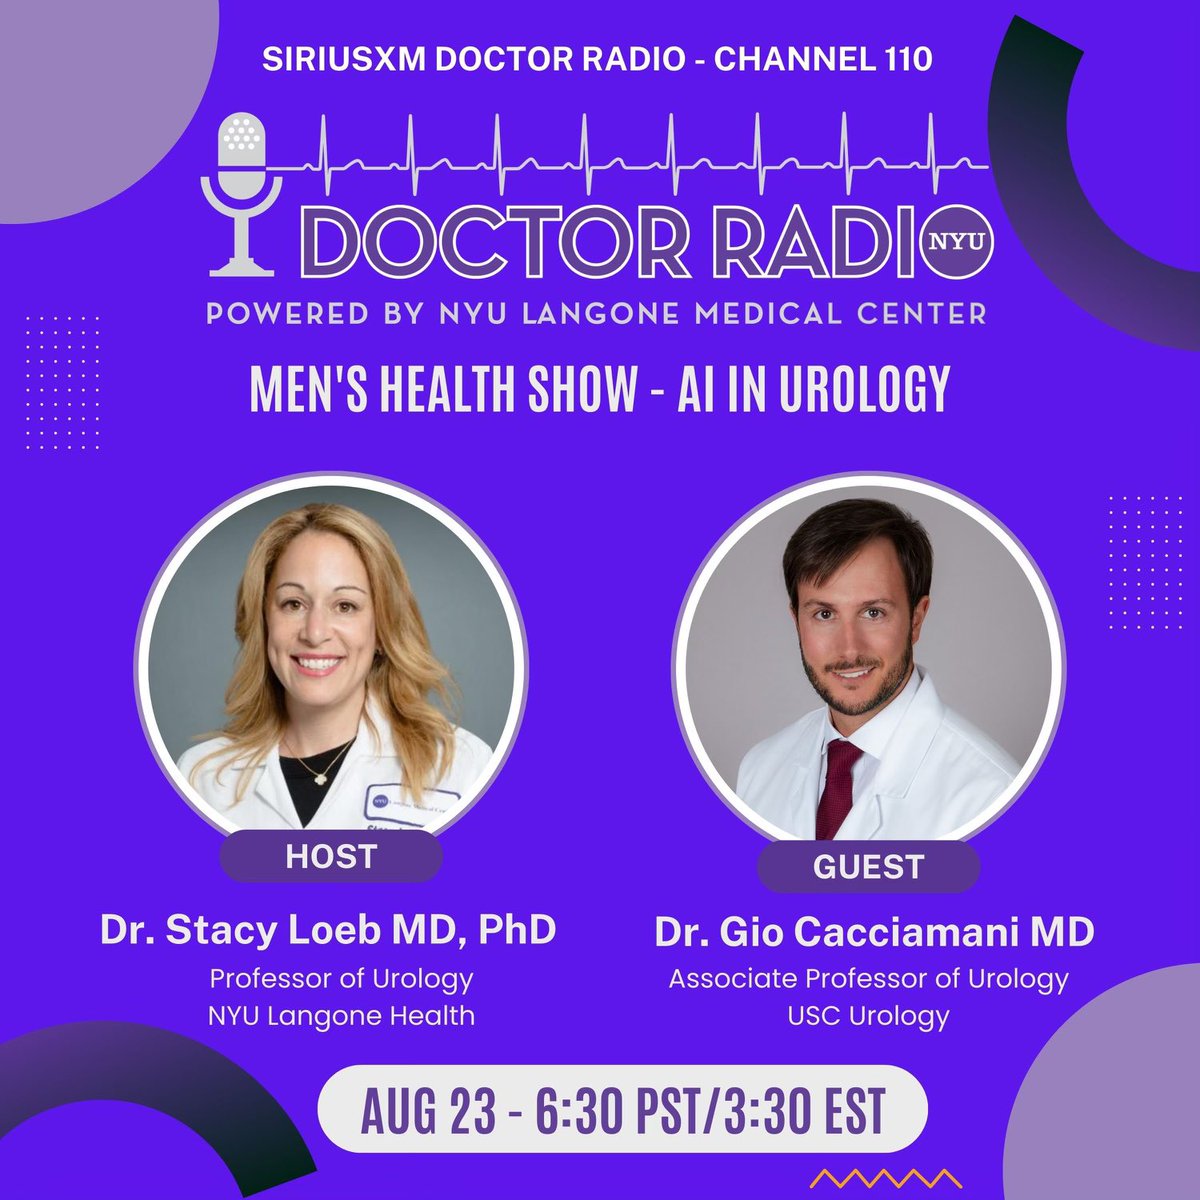 Looking forward to hear @LoebStacy and @Cacciamani_MD on @SIRIUSXM  for @NYUDocs Channel 110 talking about #AI in Urology 📅 August 23, 2023 ⏰ 6:30 PST/3:30 EST 📍siriusxm.com/doctorradio Don't miss it and stay tuned!! @AmerUrological @USC_Urology @Uroweb @EAUYAUrology